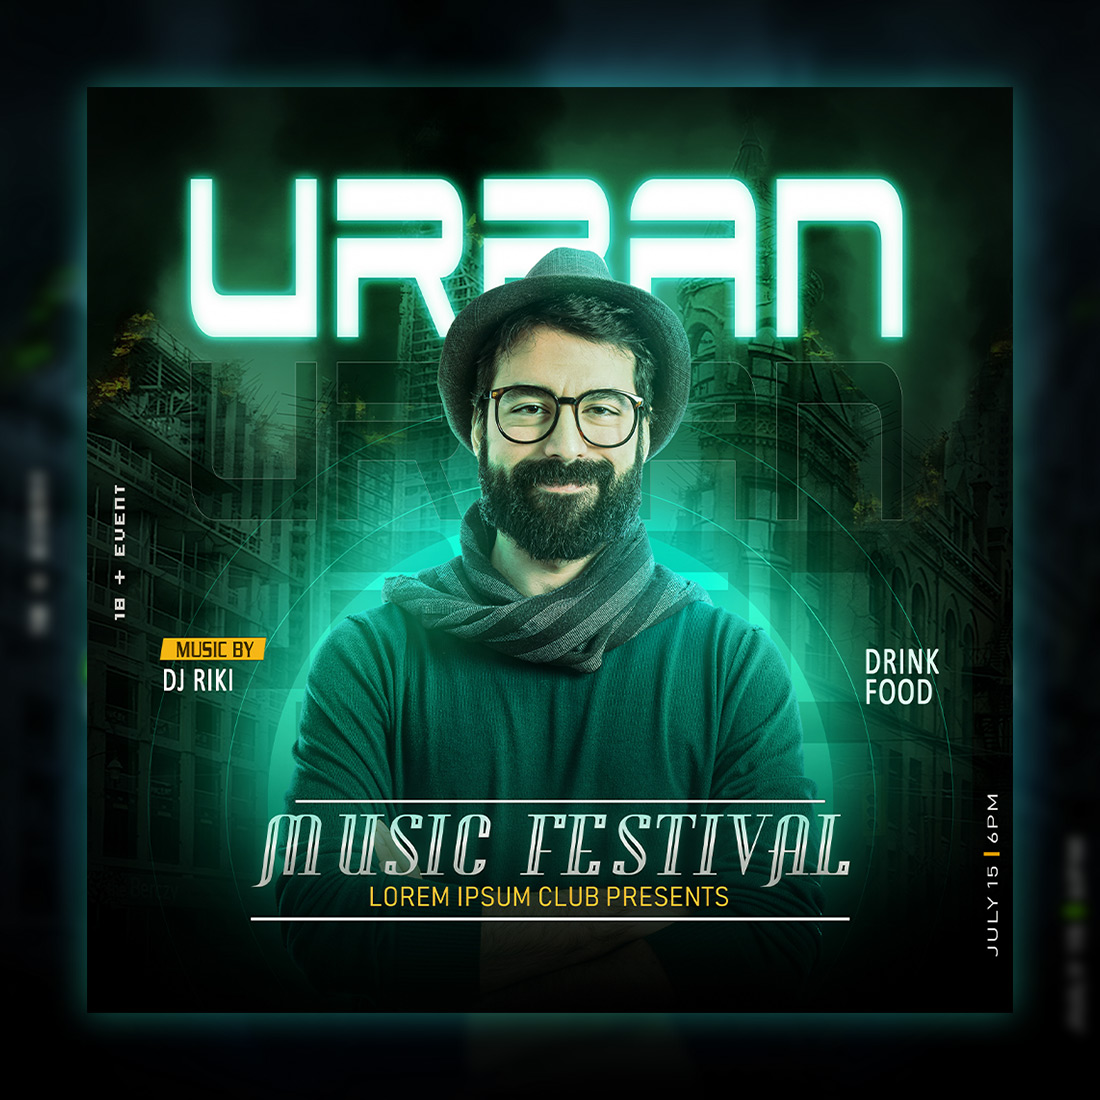 DJ, URBAN Music Party Flyer Design, social media post Photoshop Template Psd cover image.